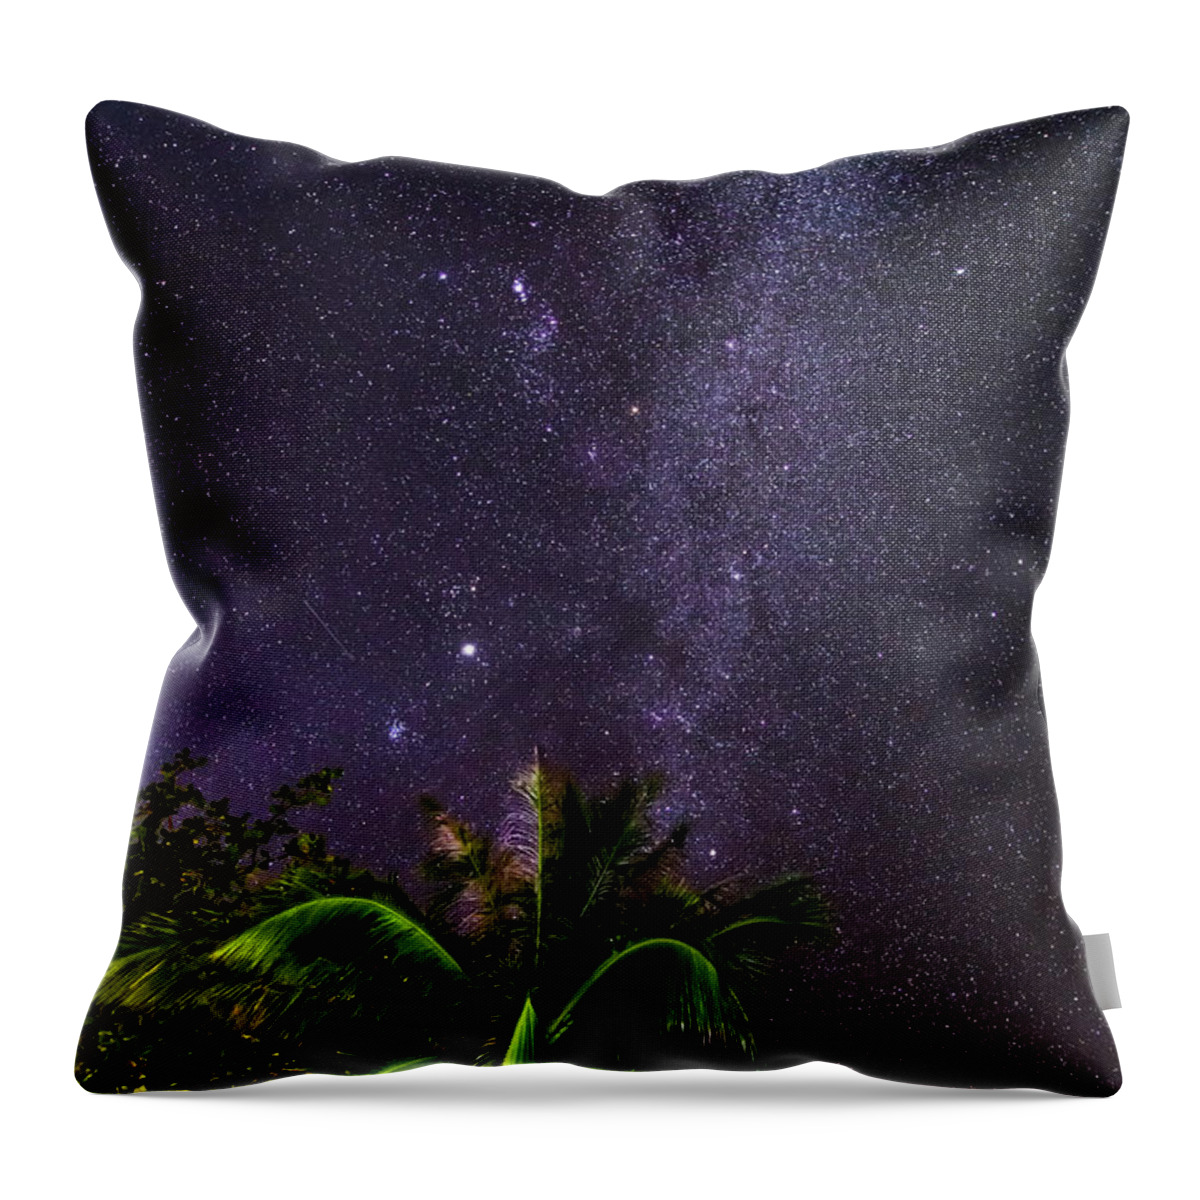 Scenics Throw Pillow featuring the photograph Youre A Star by Patrick Meier